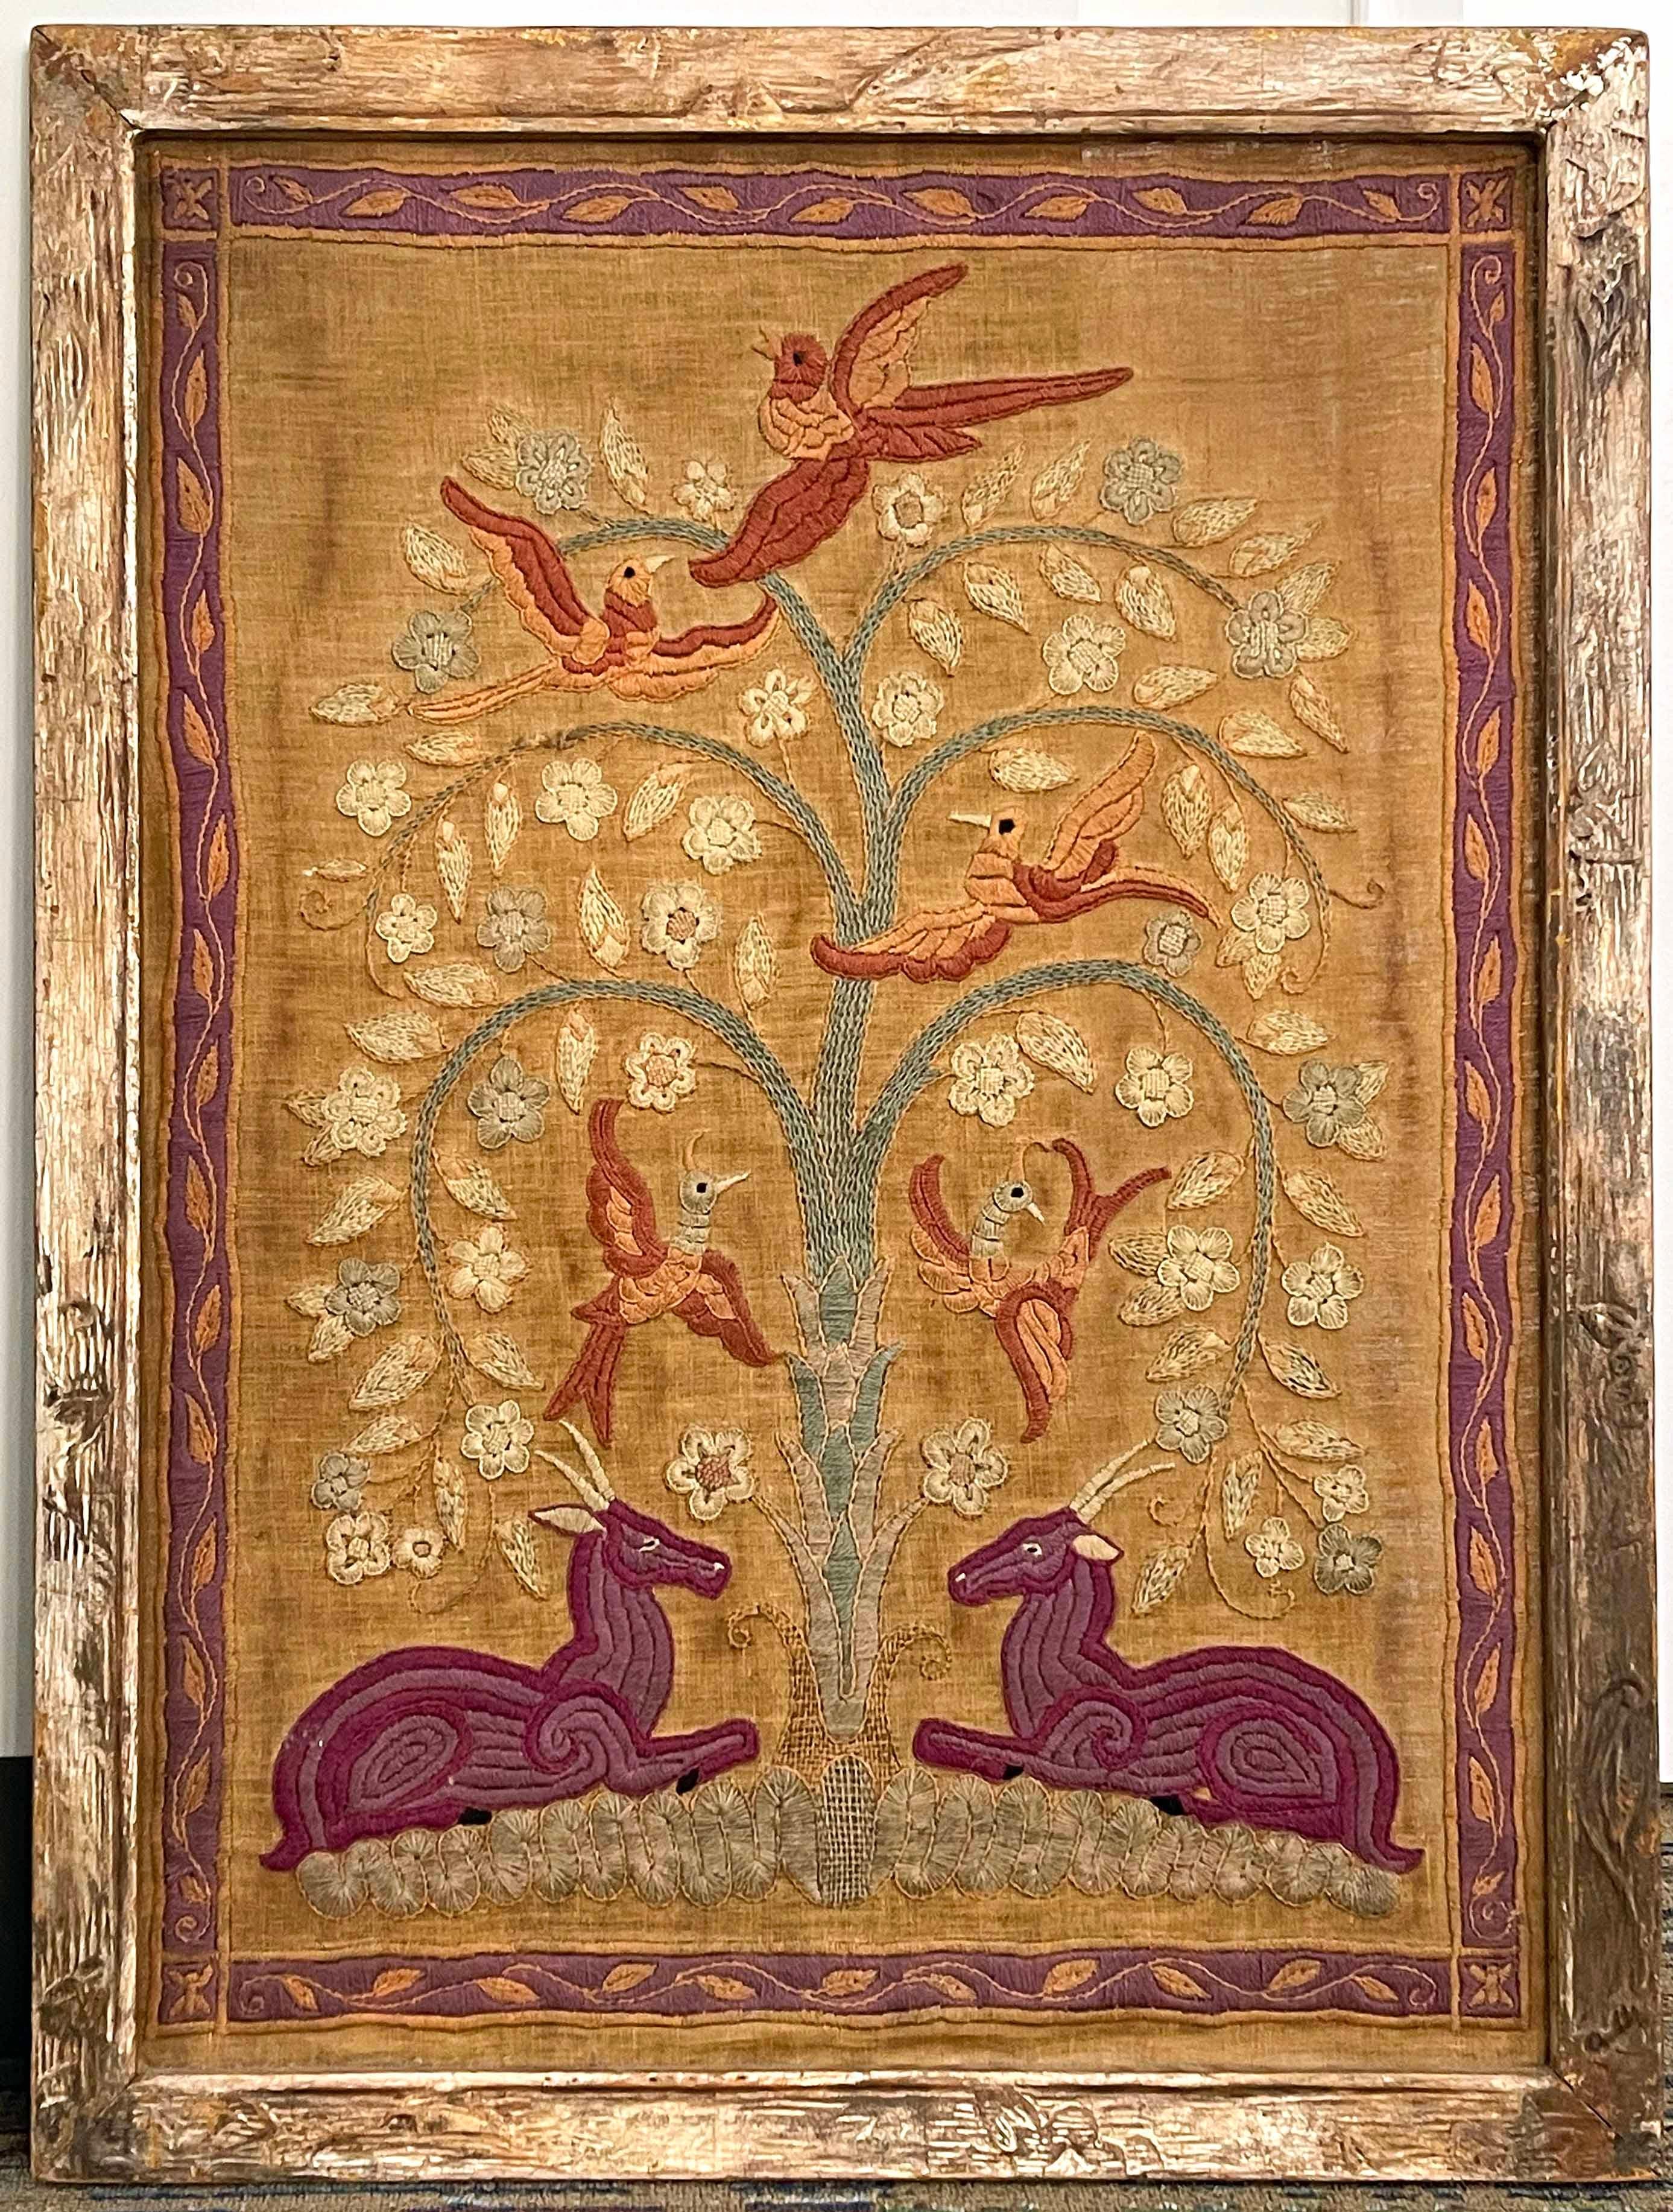 An important example of Modernist needlework and fabric design, this richly-colored embroidery panel depicts a tree of life, full of birds circling a tree expressed in the fashionable French Art Deco manner, flanked by two deer in purple.   Some